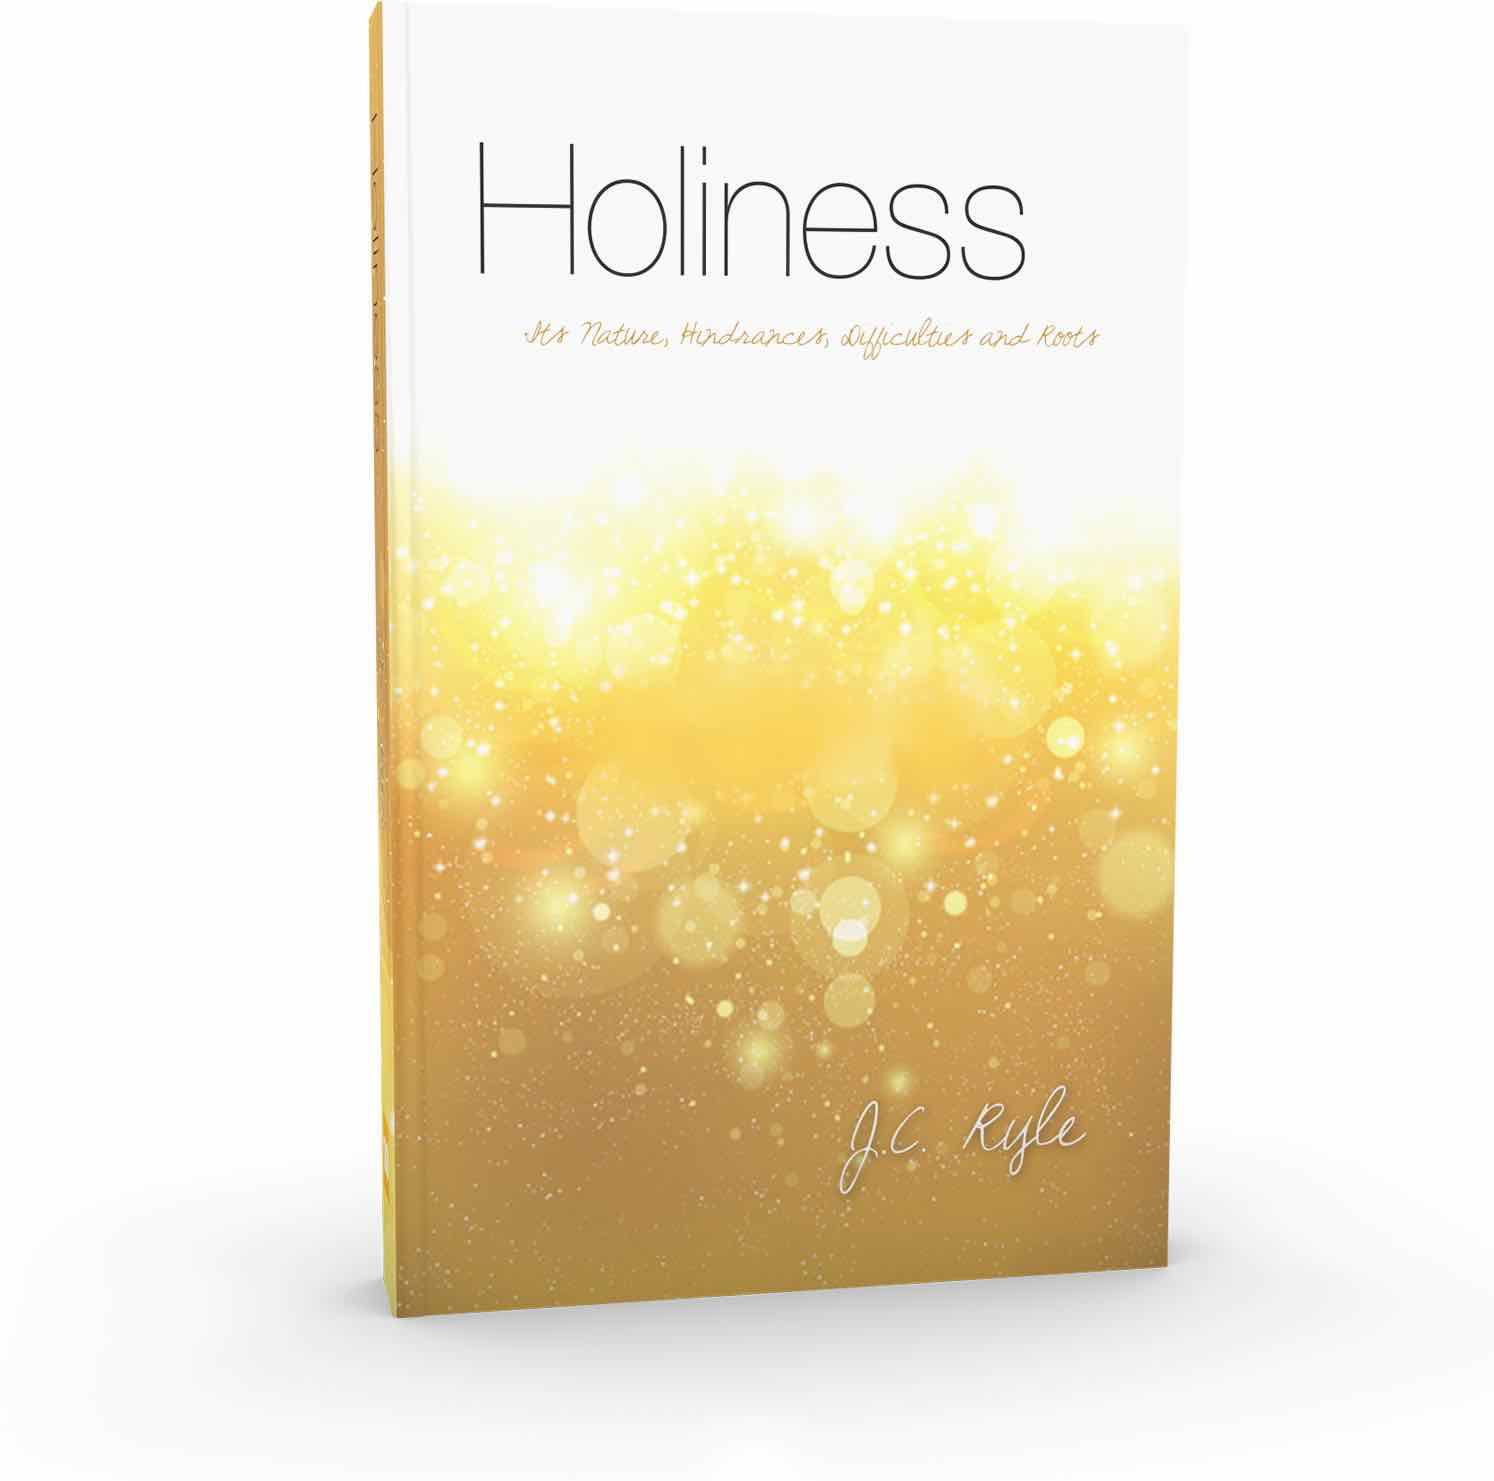 Holiness - It's Nature, Hindrances, Difficulties and Roots